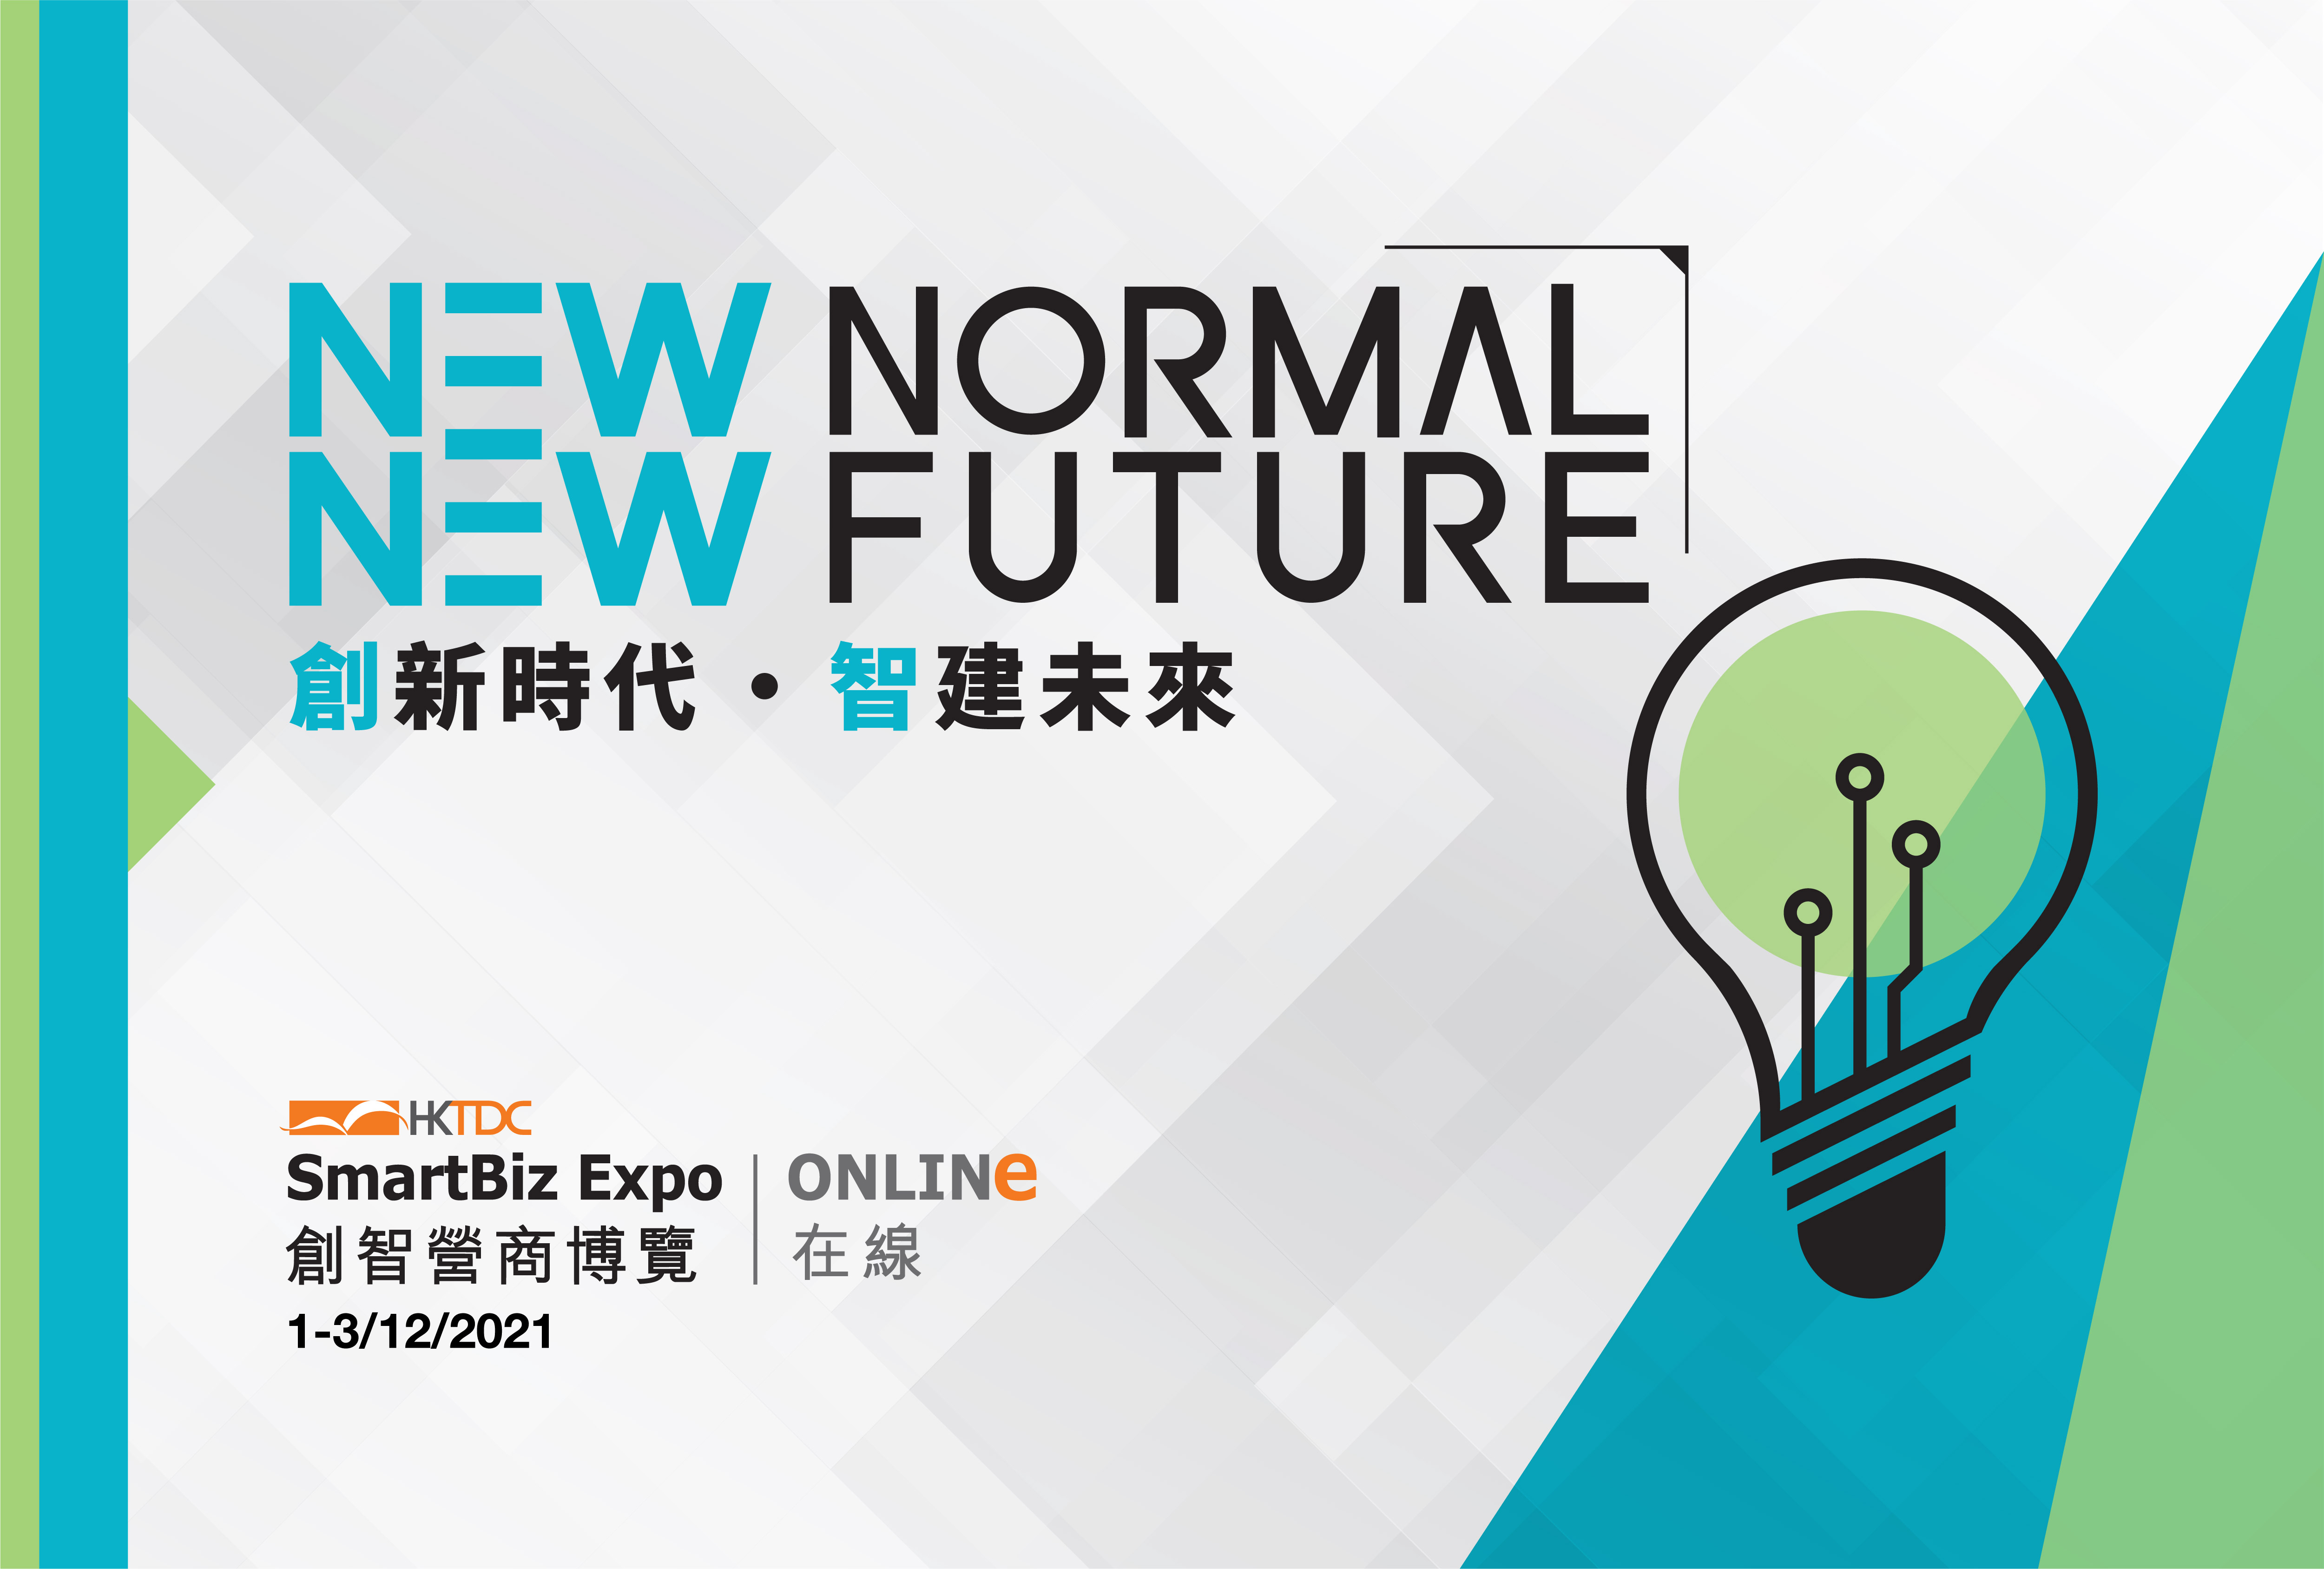 Supporting Event - HKTDC SmartBiz Expo ONLINE